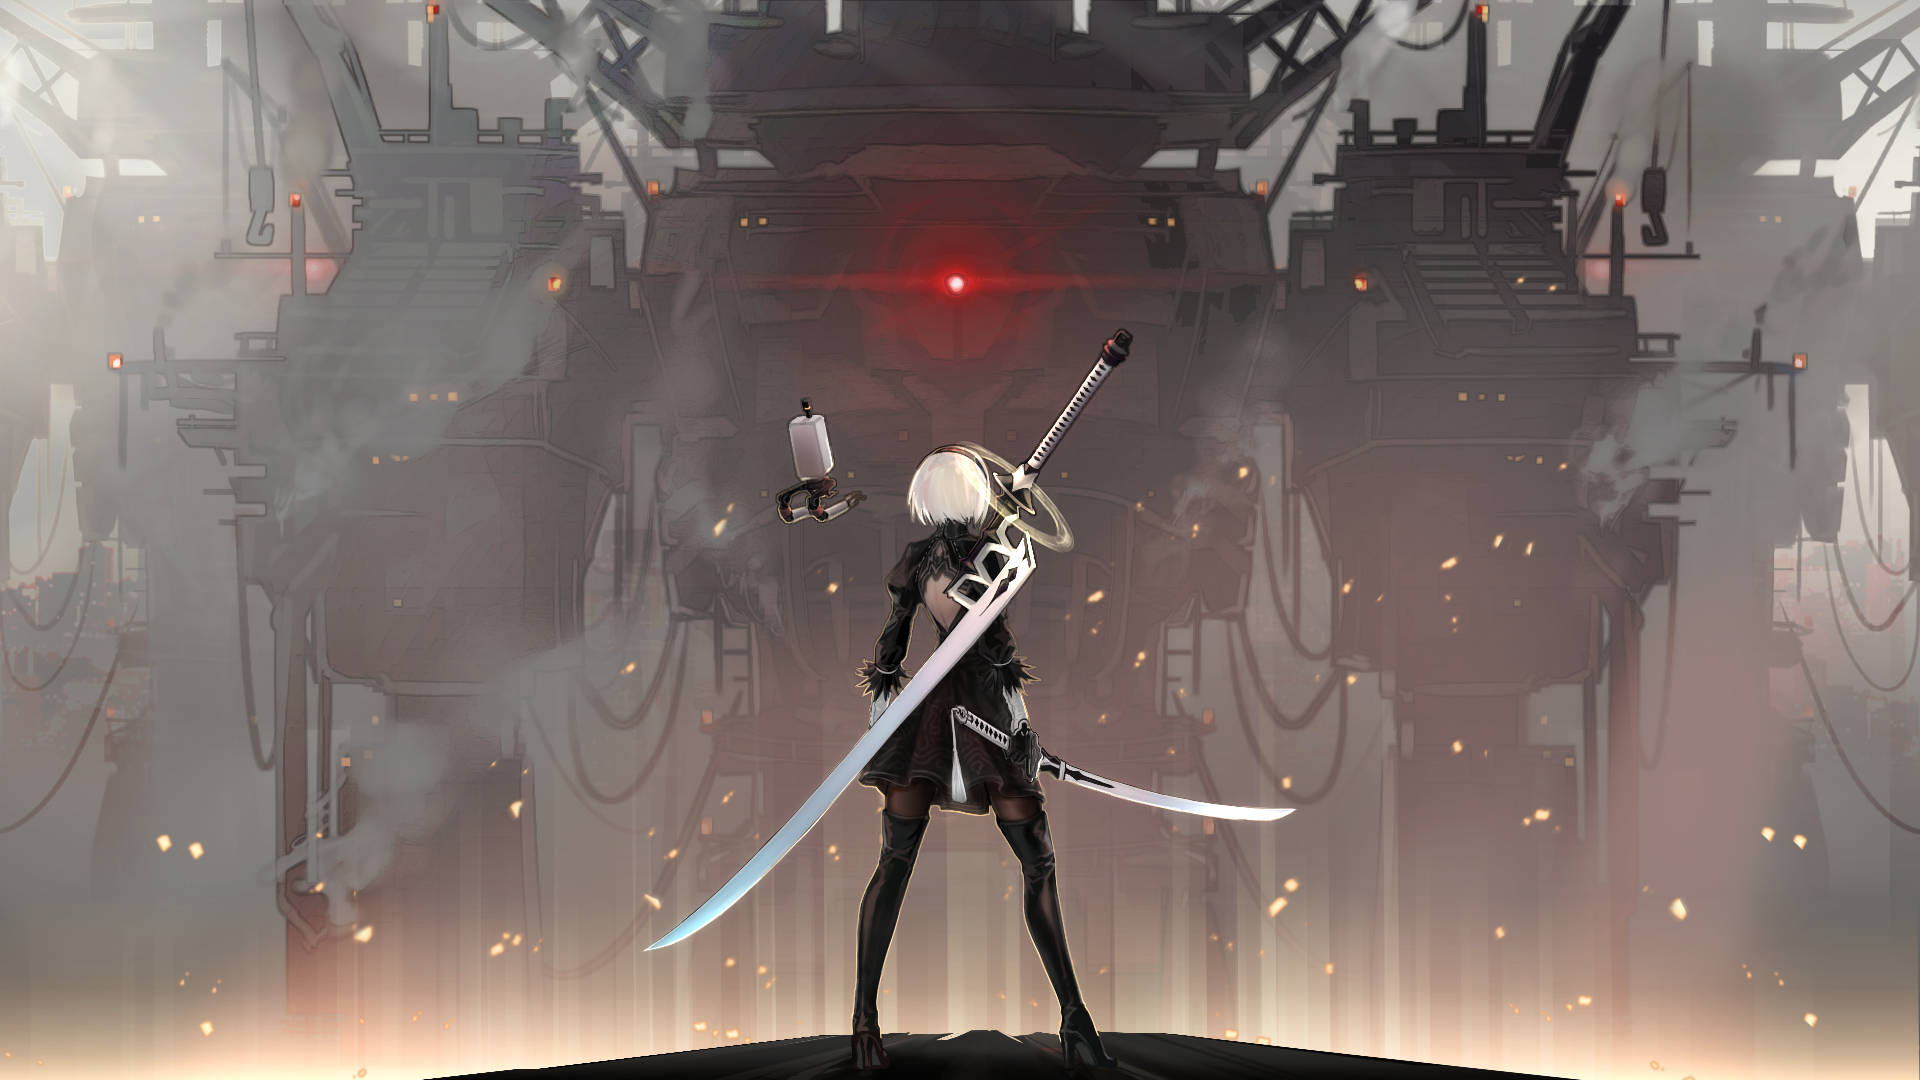 Top 999+ Nier Automata Wallpaper Full HD, 4K✅Free to Use